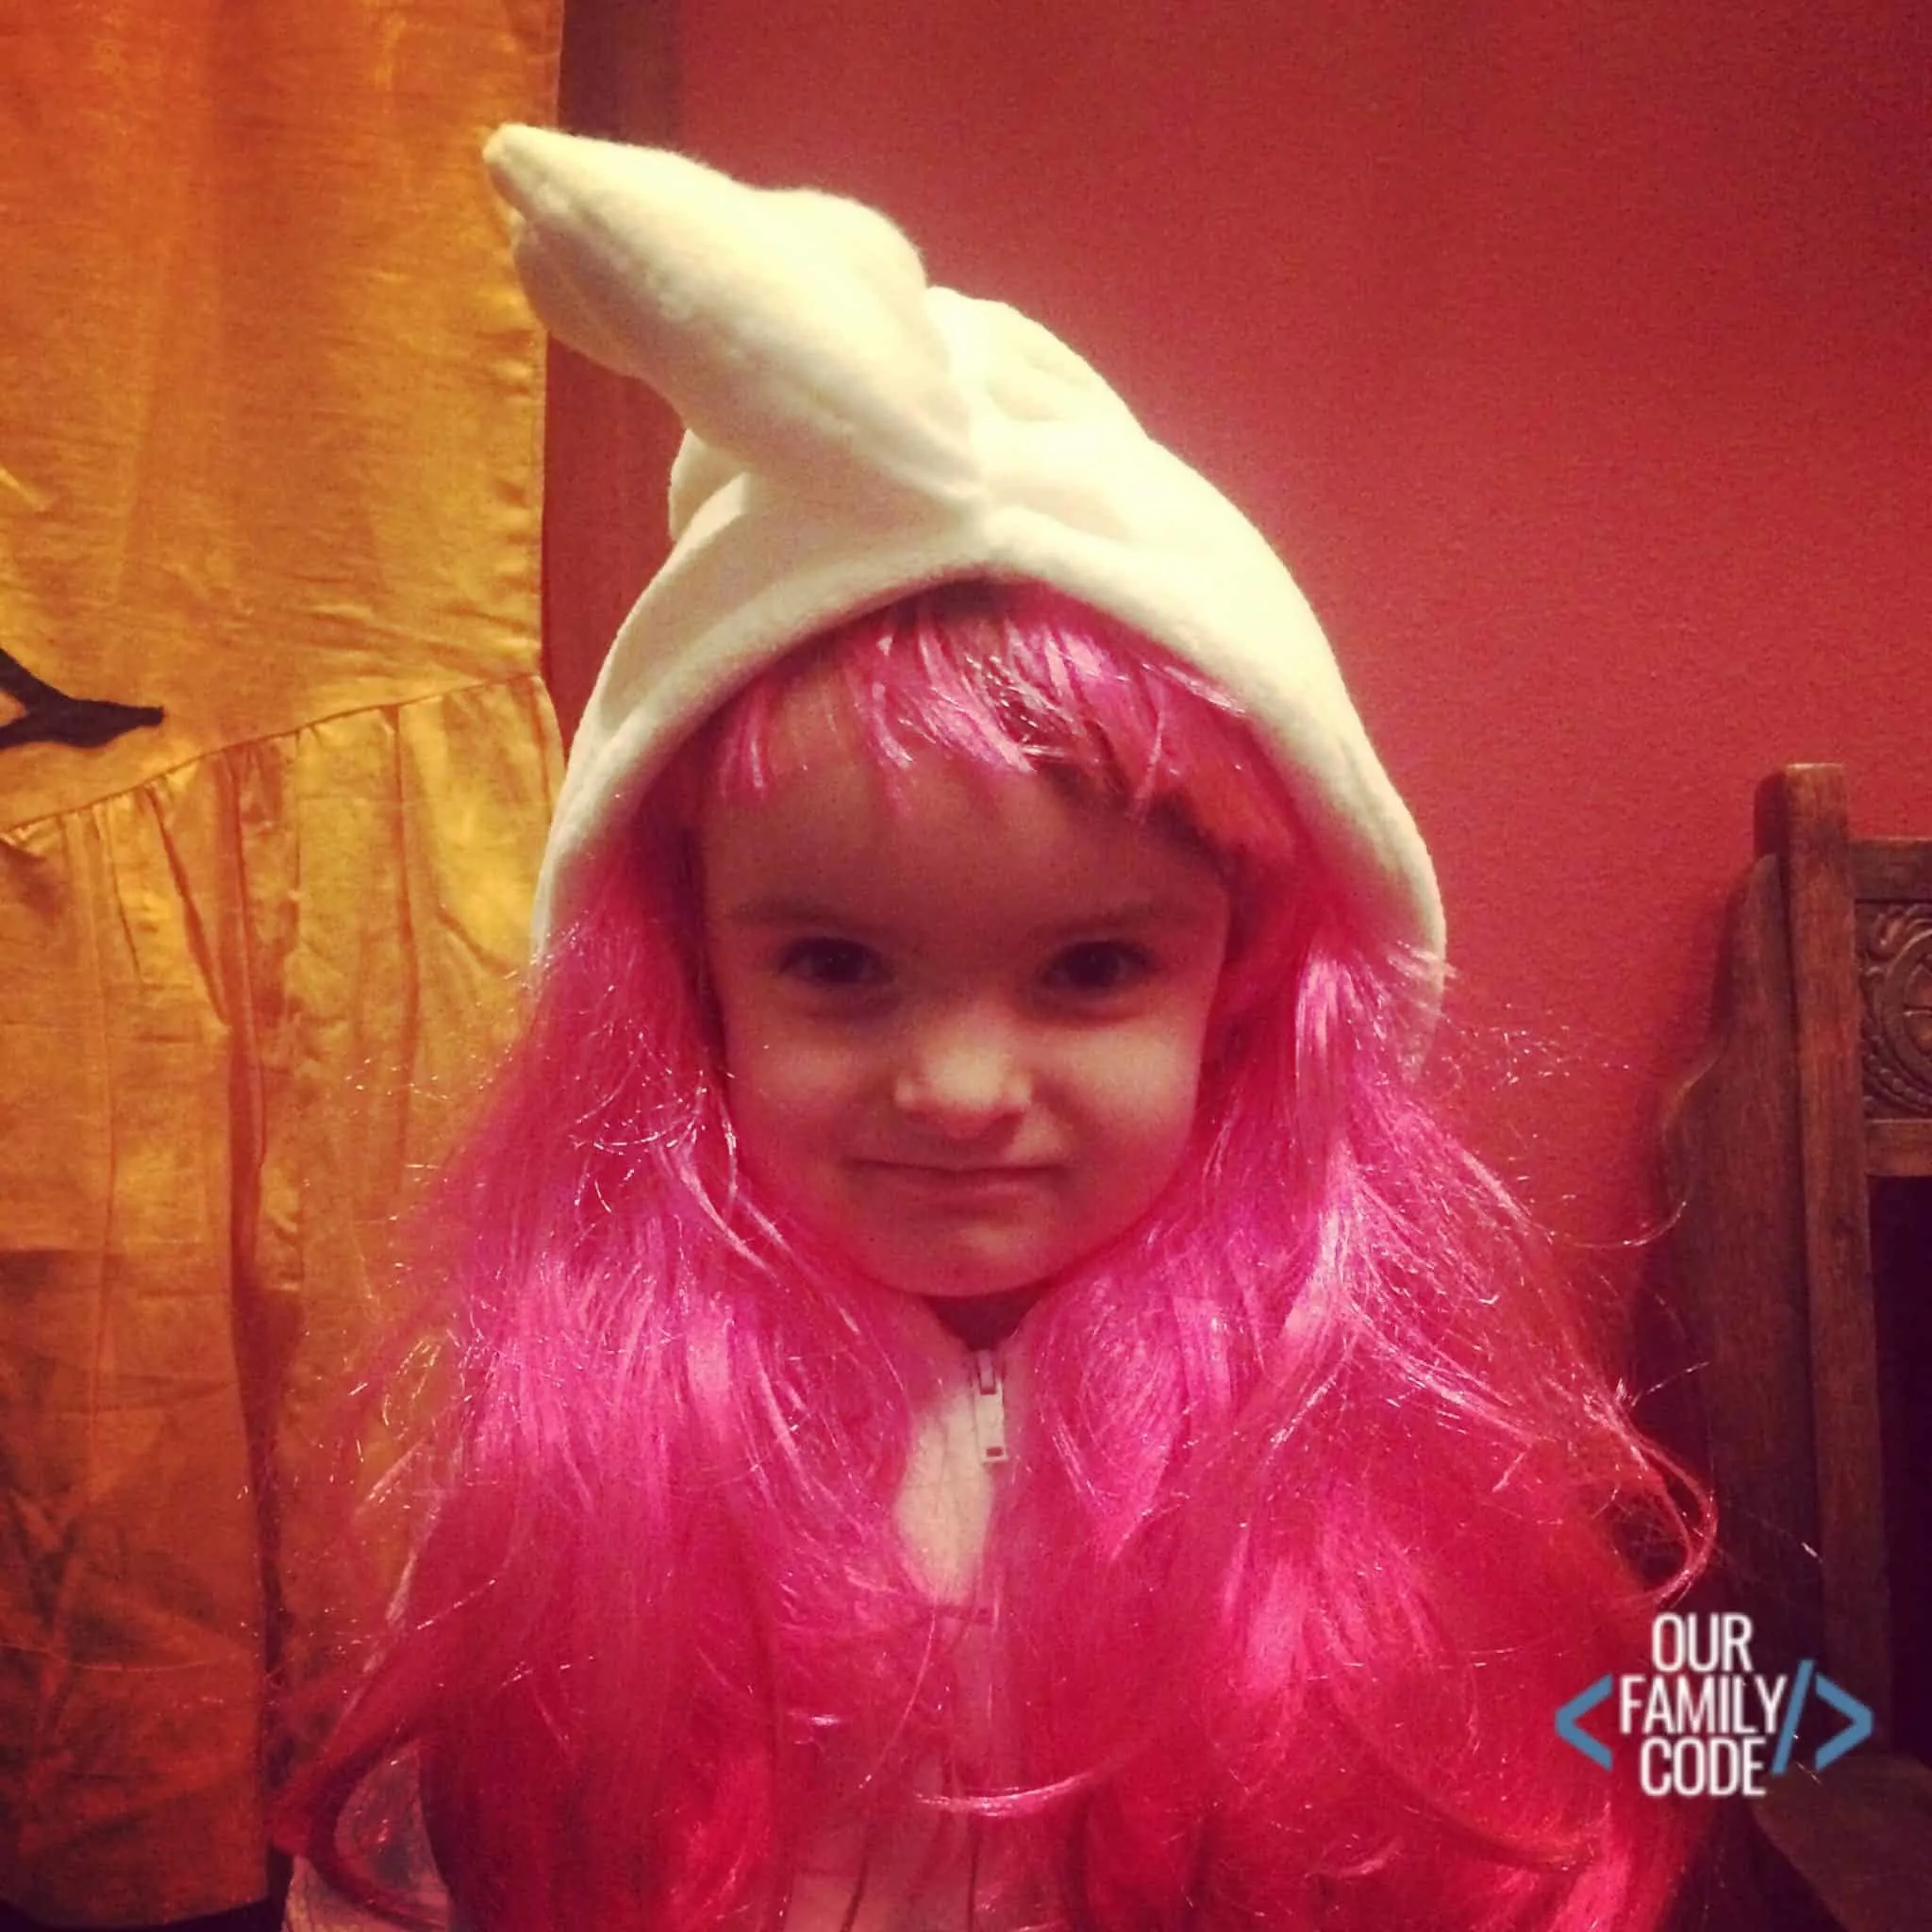 A picture of a kid wearing a bright pink wig.